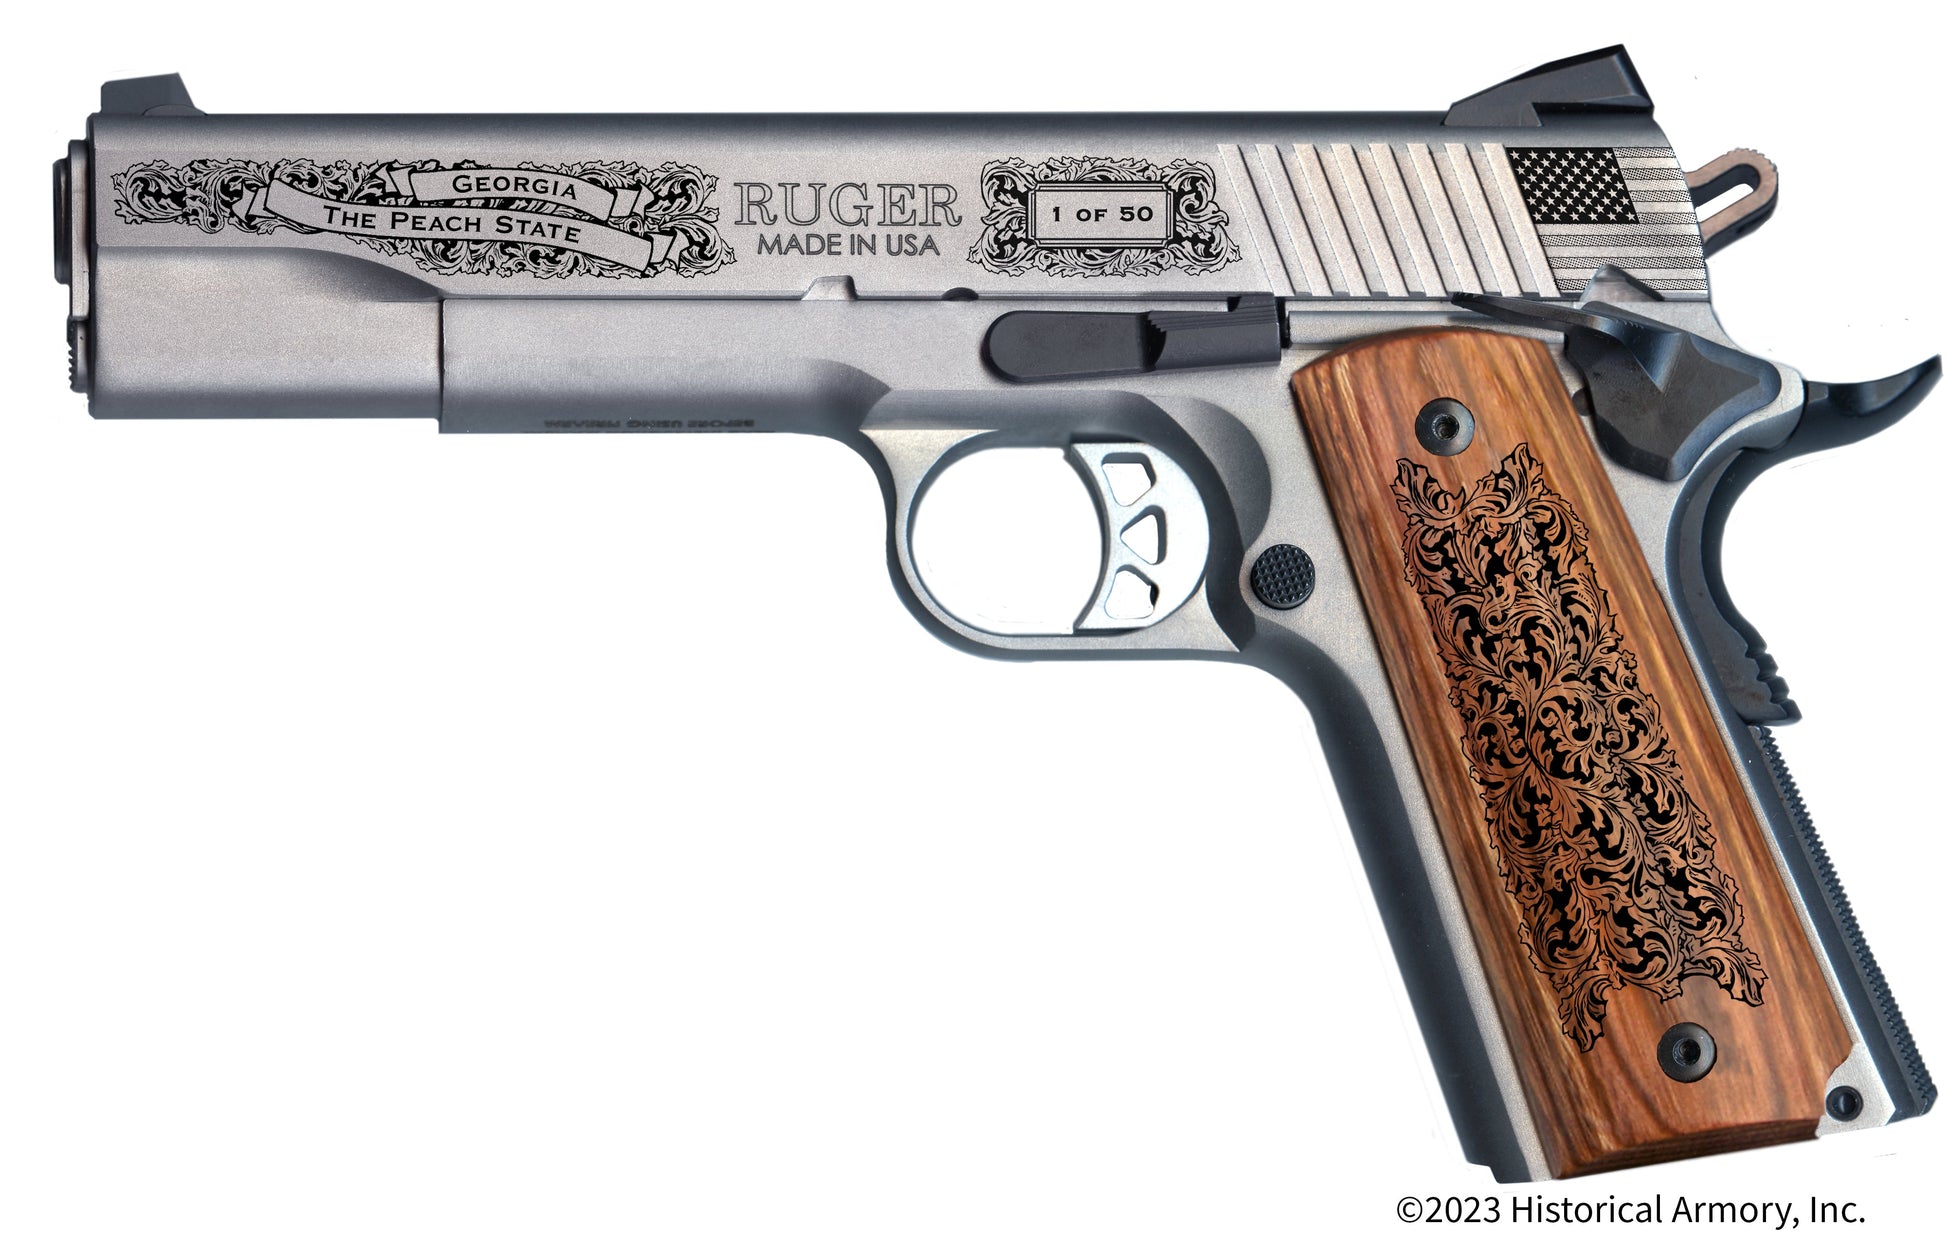 Hall County Georgia Engraved .45 Auto Ruger 1911